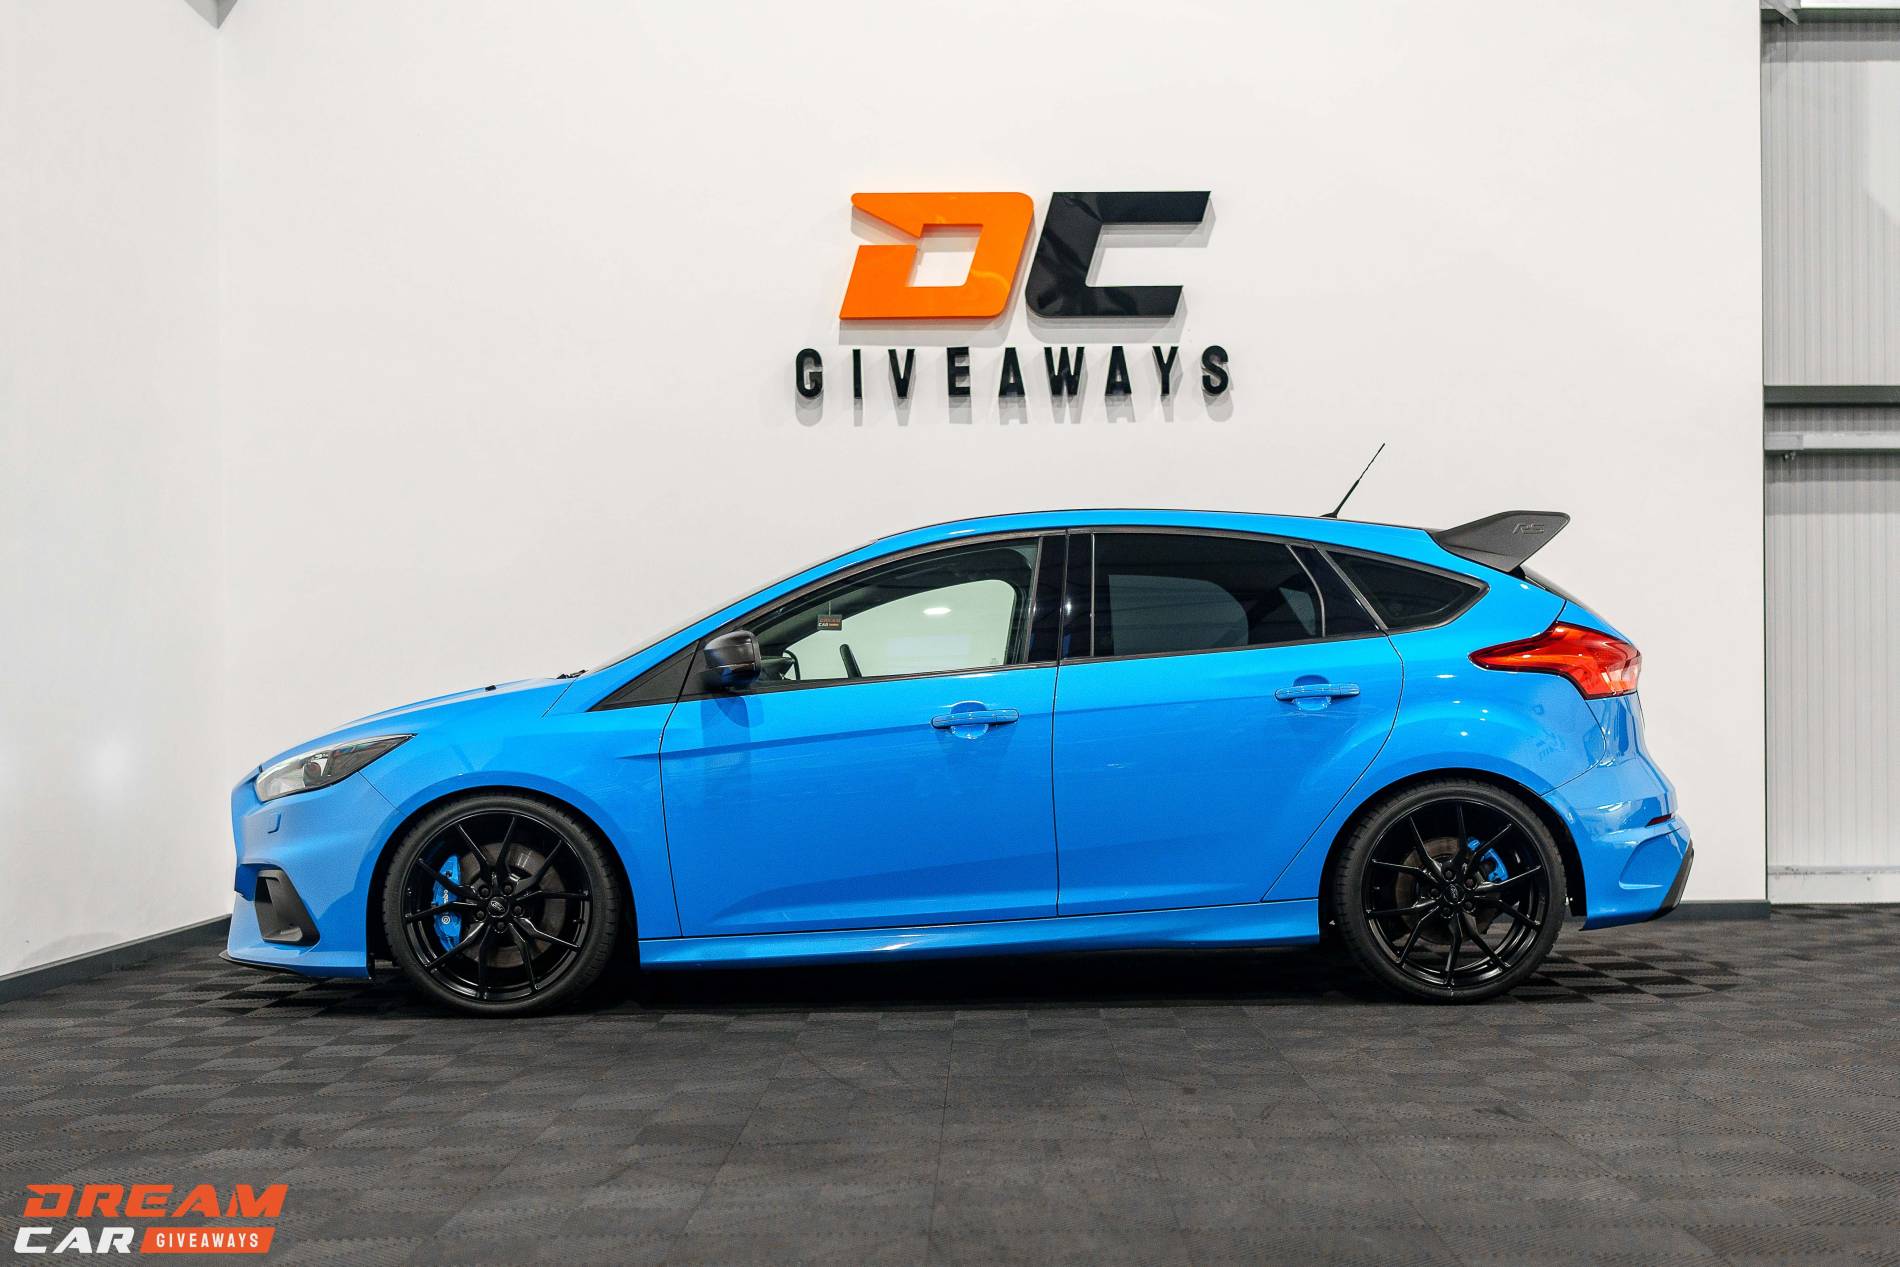 Ford Focus RS & £1,000 - Only 999 Entries